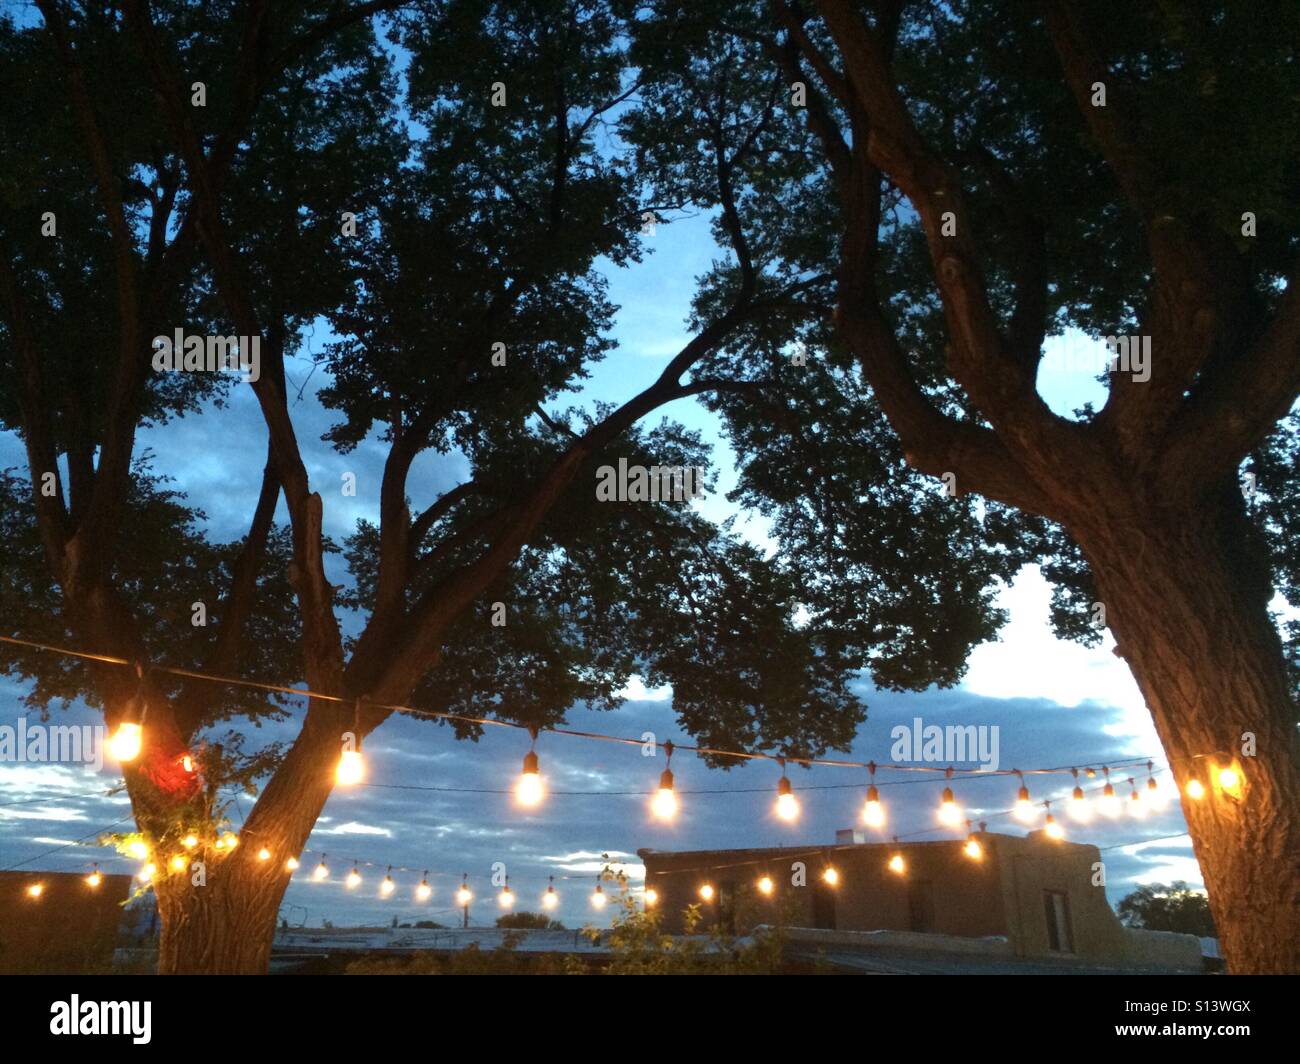 Decorative lights hang in a backyard patio before a evening sky. Stock Photo